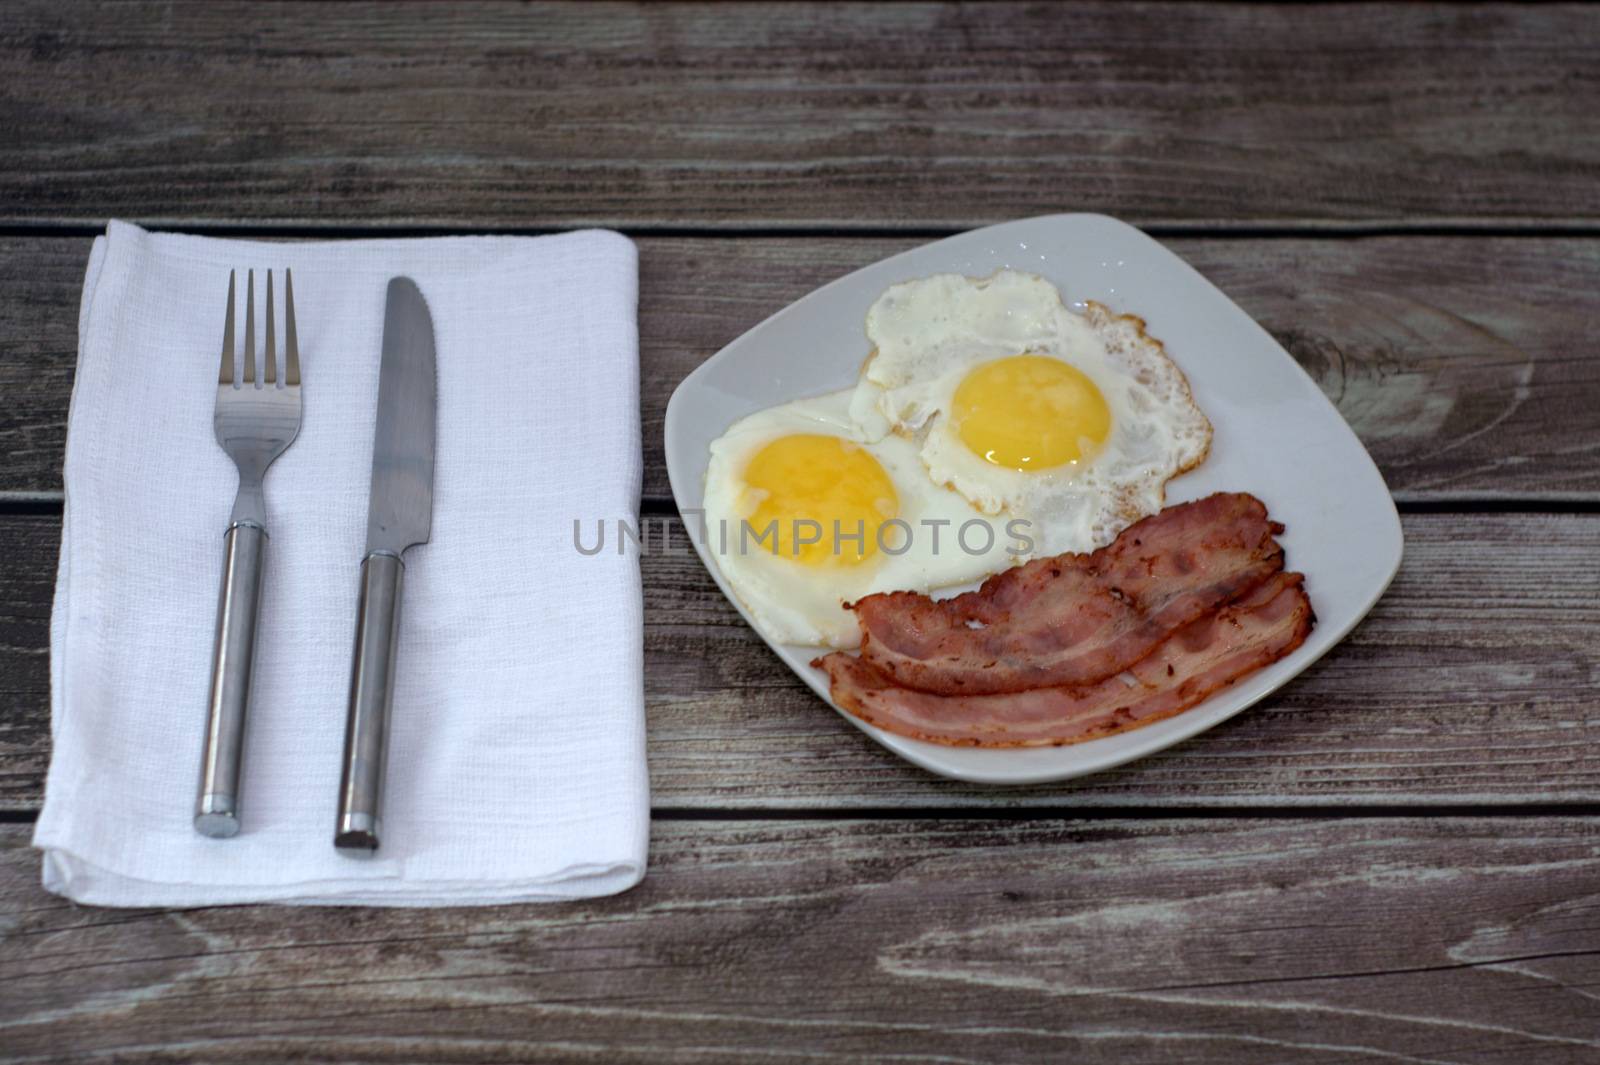 A plate with fried eggs and bacon on the table, next to a napkin with cutlery.